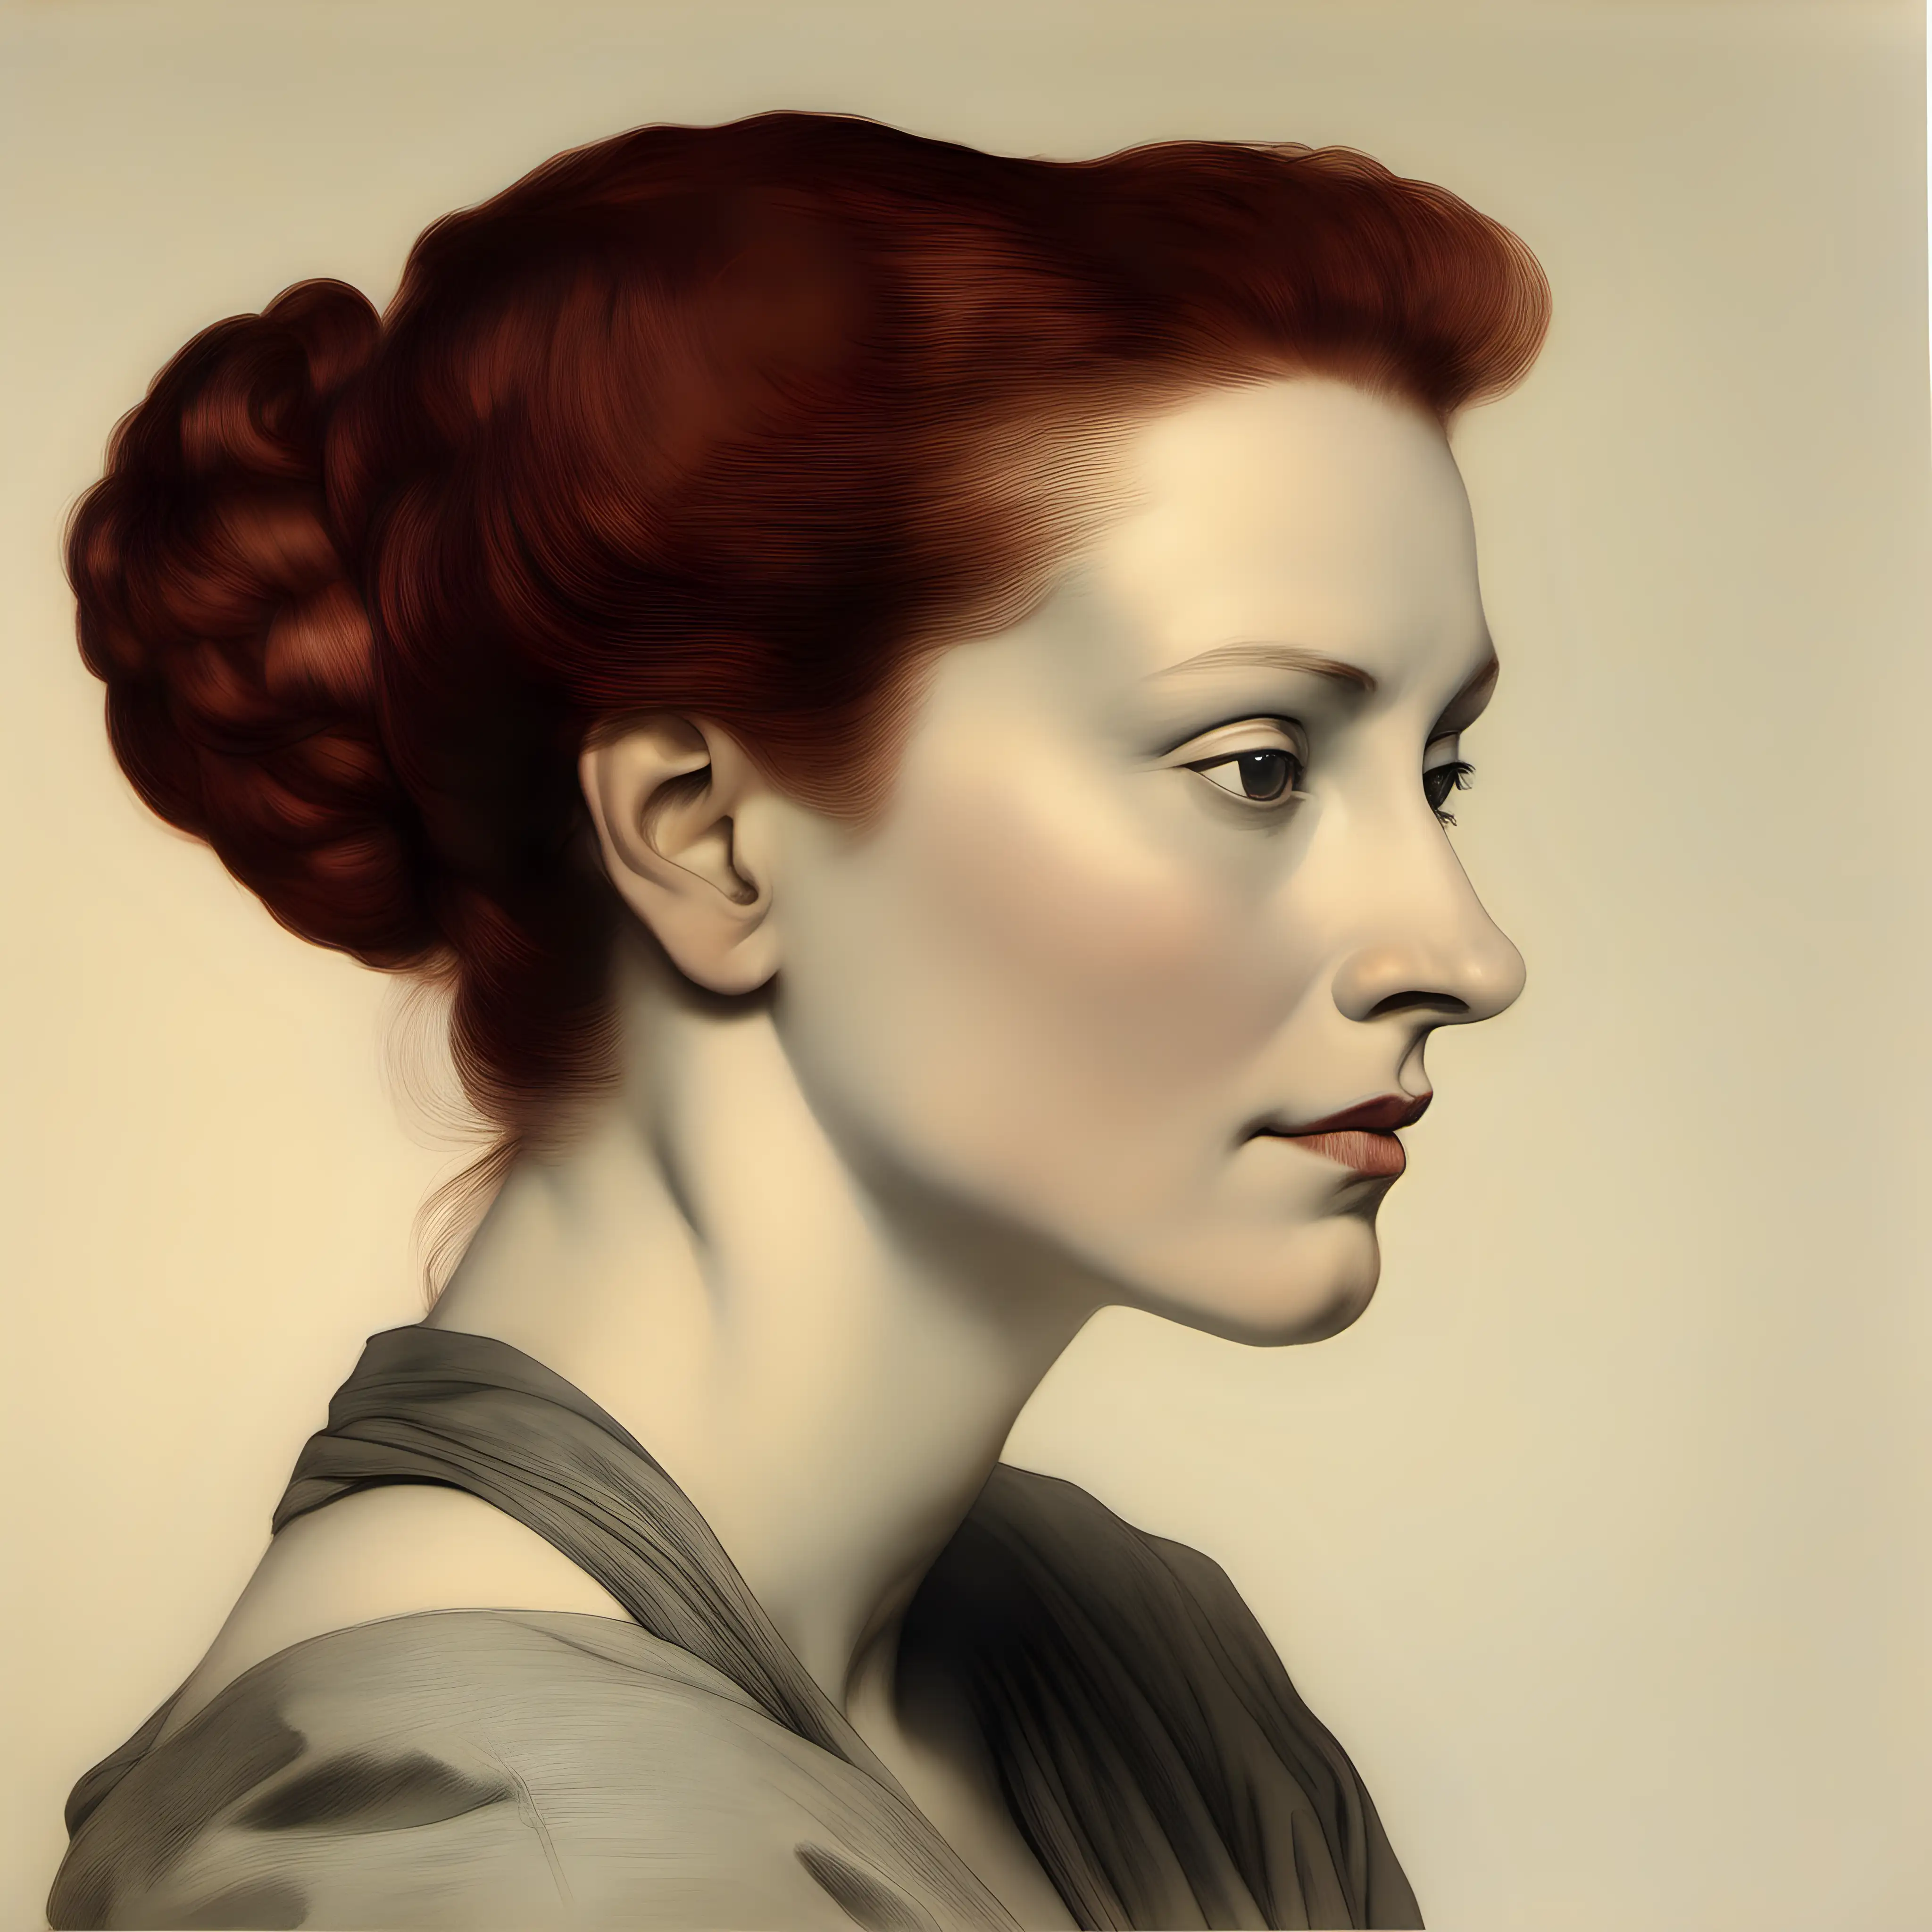 A COLOR PORTRAIT OF A BEAUTIFUL, THIN,  DARK RED HAIRED WOMAN, SEATED, TOWARD THE LEFT, WITH HER HAIR PULLED BACK IN A LARGE BUN, AT THE  BOTTON OF HER NECK,   A 3/4 VIEW,  NOT A PROFILE VIEW, A BEAUTIFUL WOMAN IN MODERN DAY CLOTHING,  NO OLD FASHIONED CLOTHING, LOW CUT NECK, NO HANDS OR ARMS SHOWING,  BUN OF HAIR LOW, AT THE NAPE OF HER NECK,